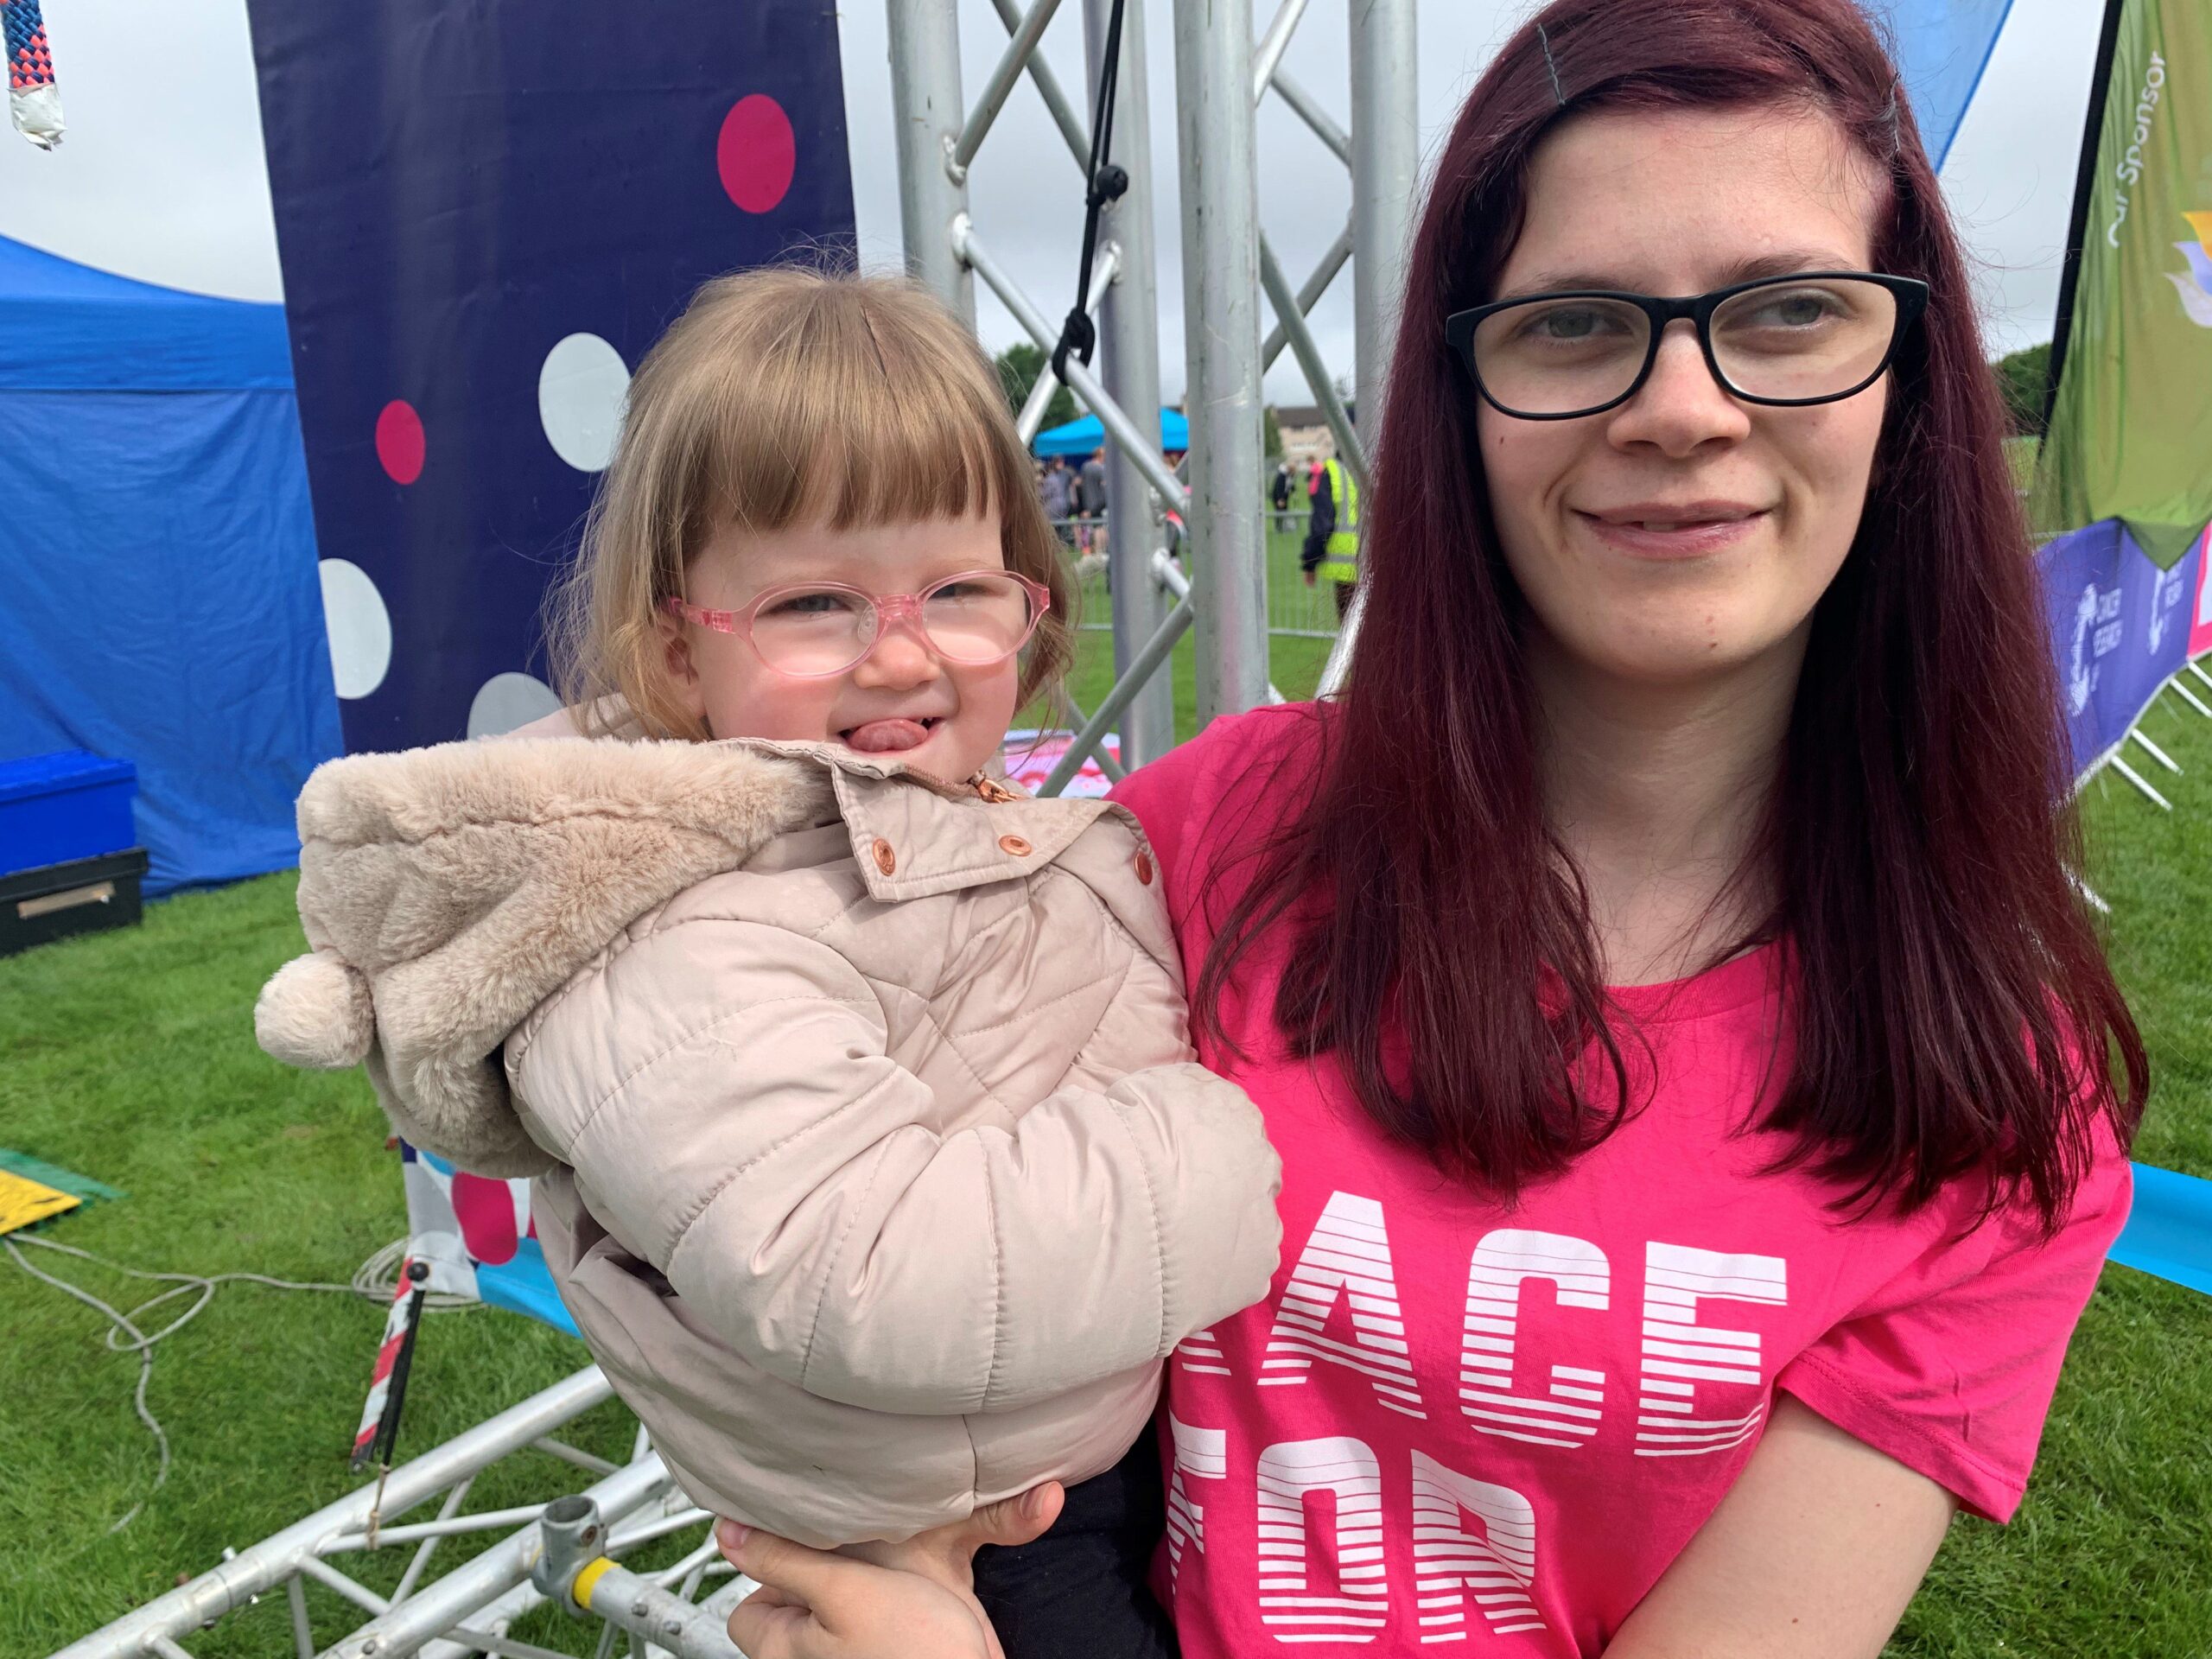 Race for Life Inverness VIP starter Shannon Murphy 22 with her daughter Sophia. Shannon rang the bell in memory of her husband Michael who died aged 25 from cancer scaled